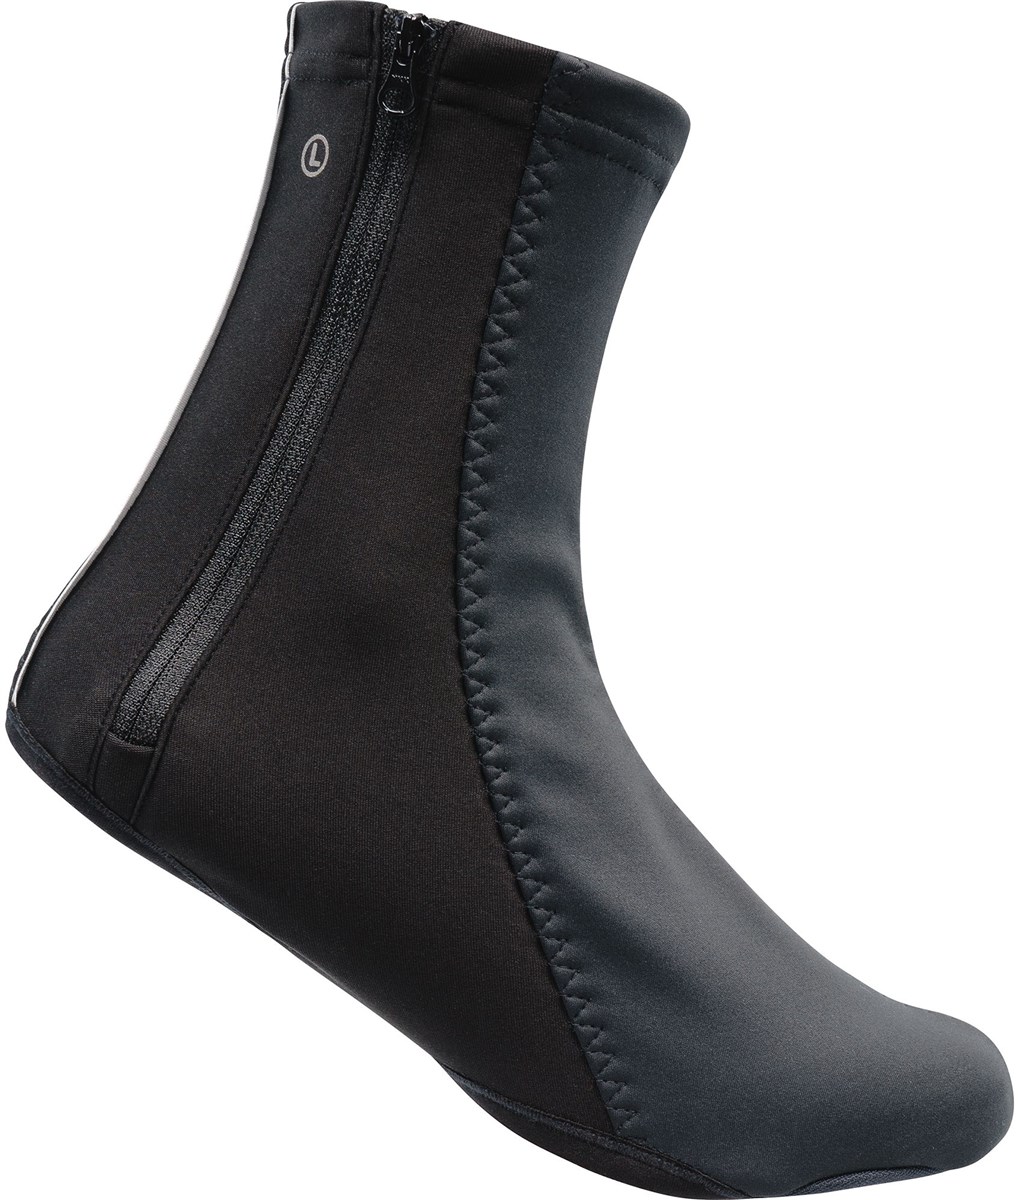 Gore Universal Gore Windstopper Overshoes AW17 product image